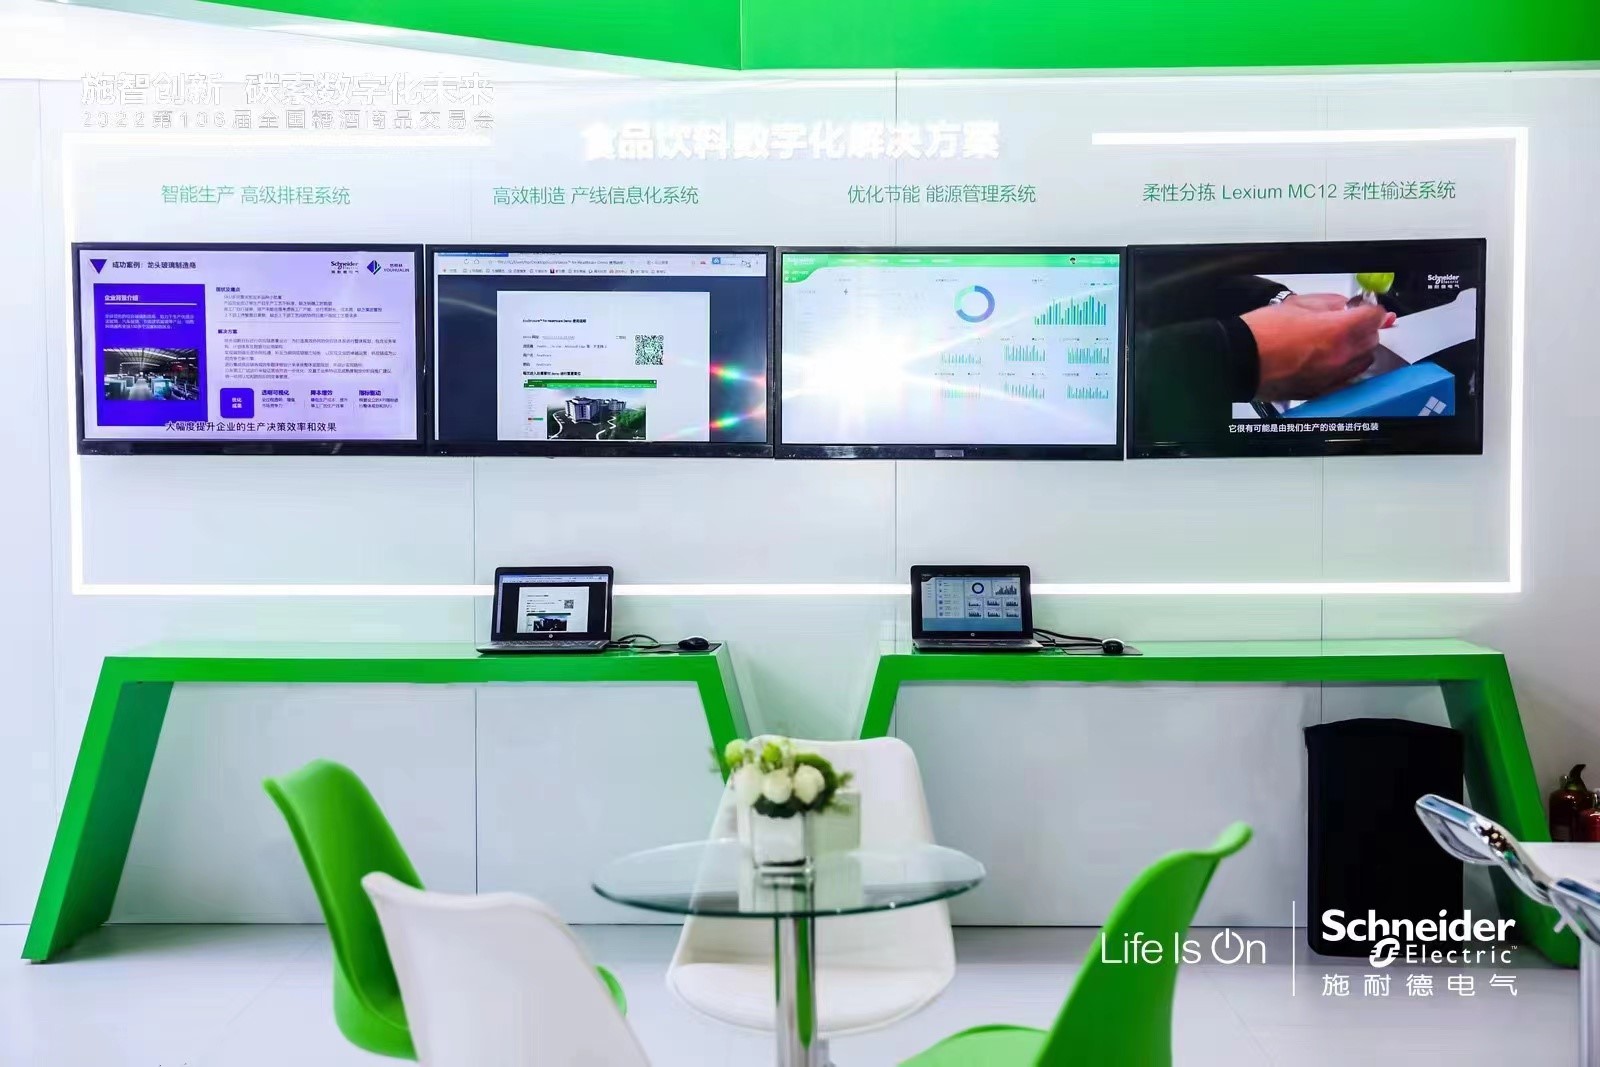 Appeared at the 106th China Food and Drinks Fair Schneider Electric injects digital &#8220;taste&#8221; into the food and beverage industry